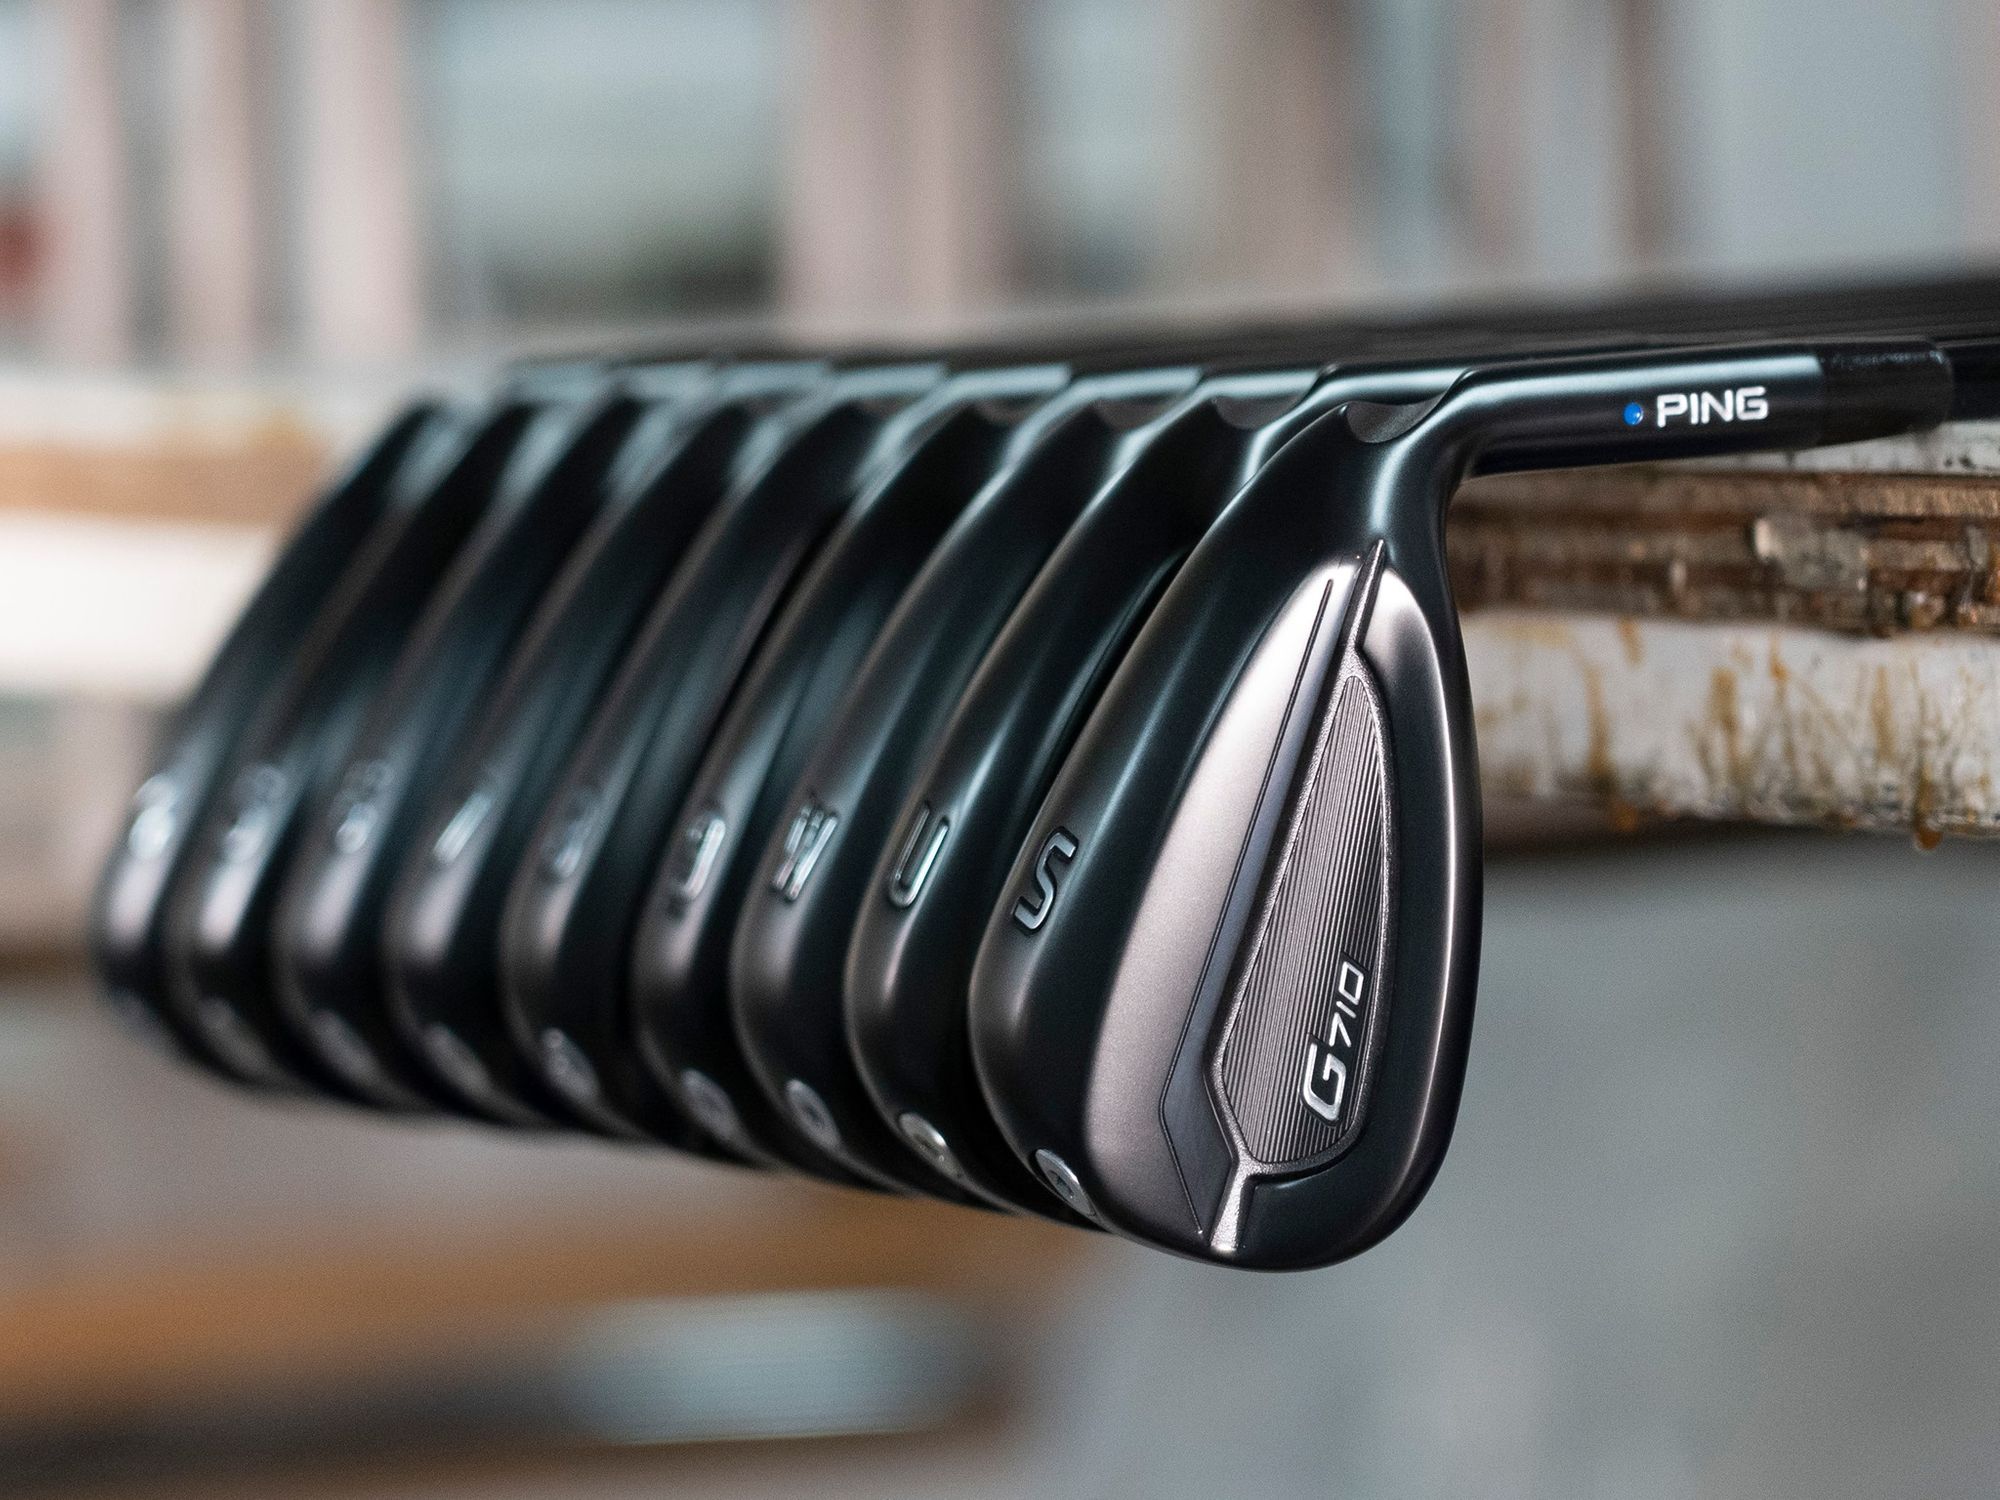 new-ping-g710-irons